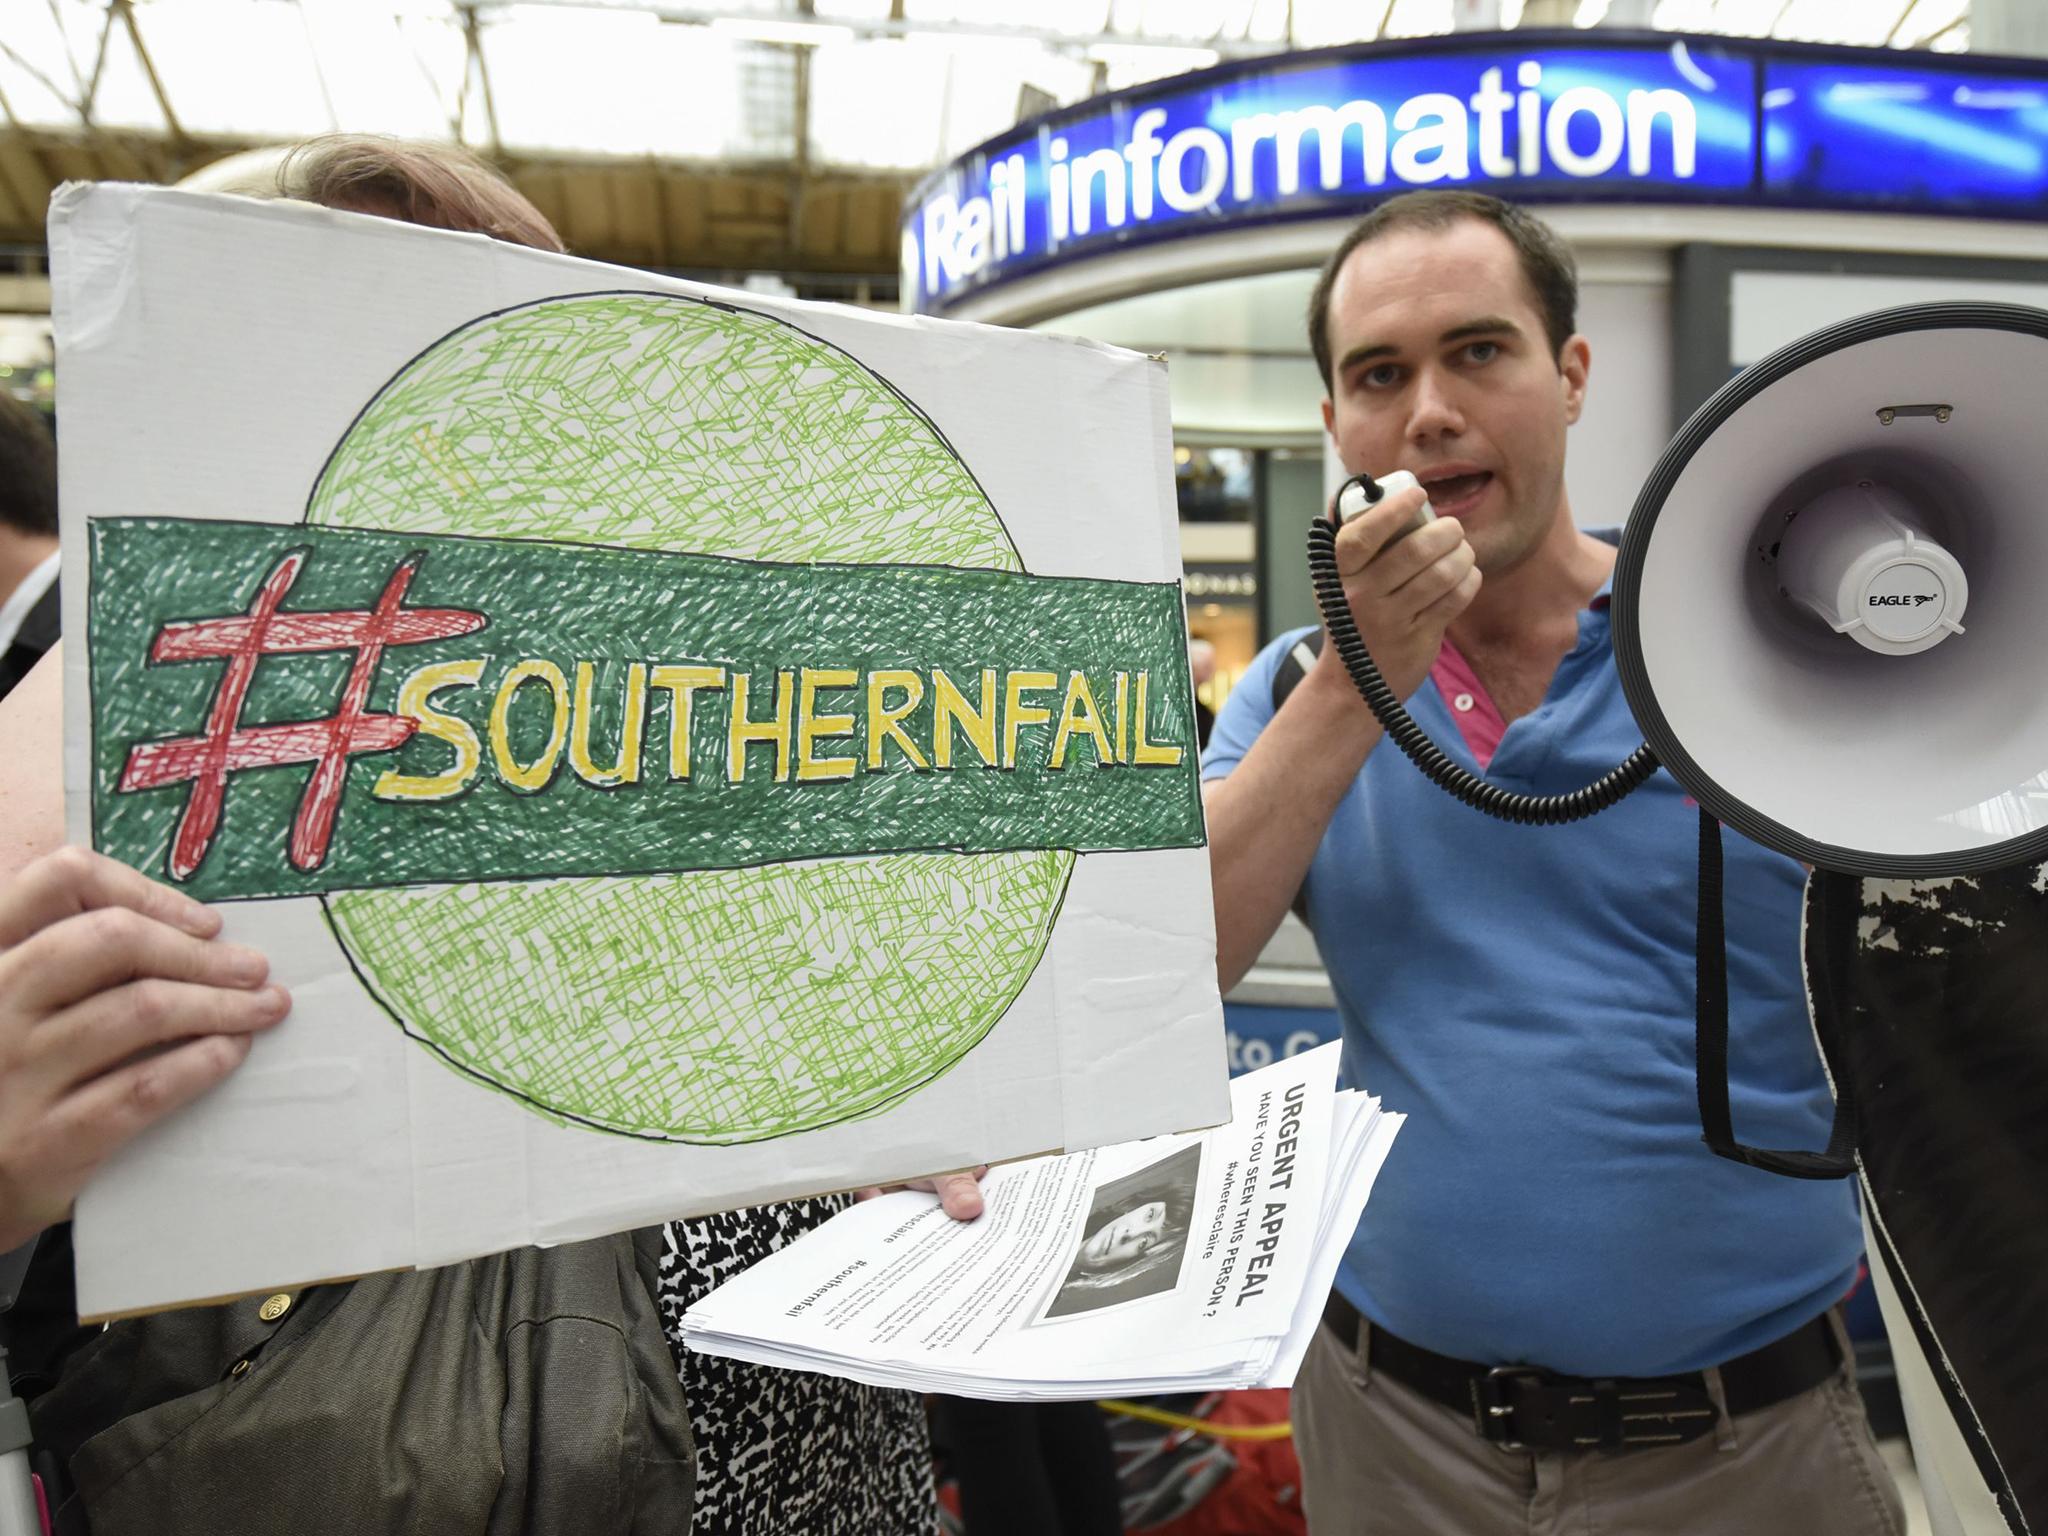 Passengers stage a 'fare strike' and protest at Victoria Station in central London in response to Southern Railway's delays